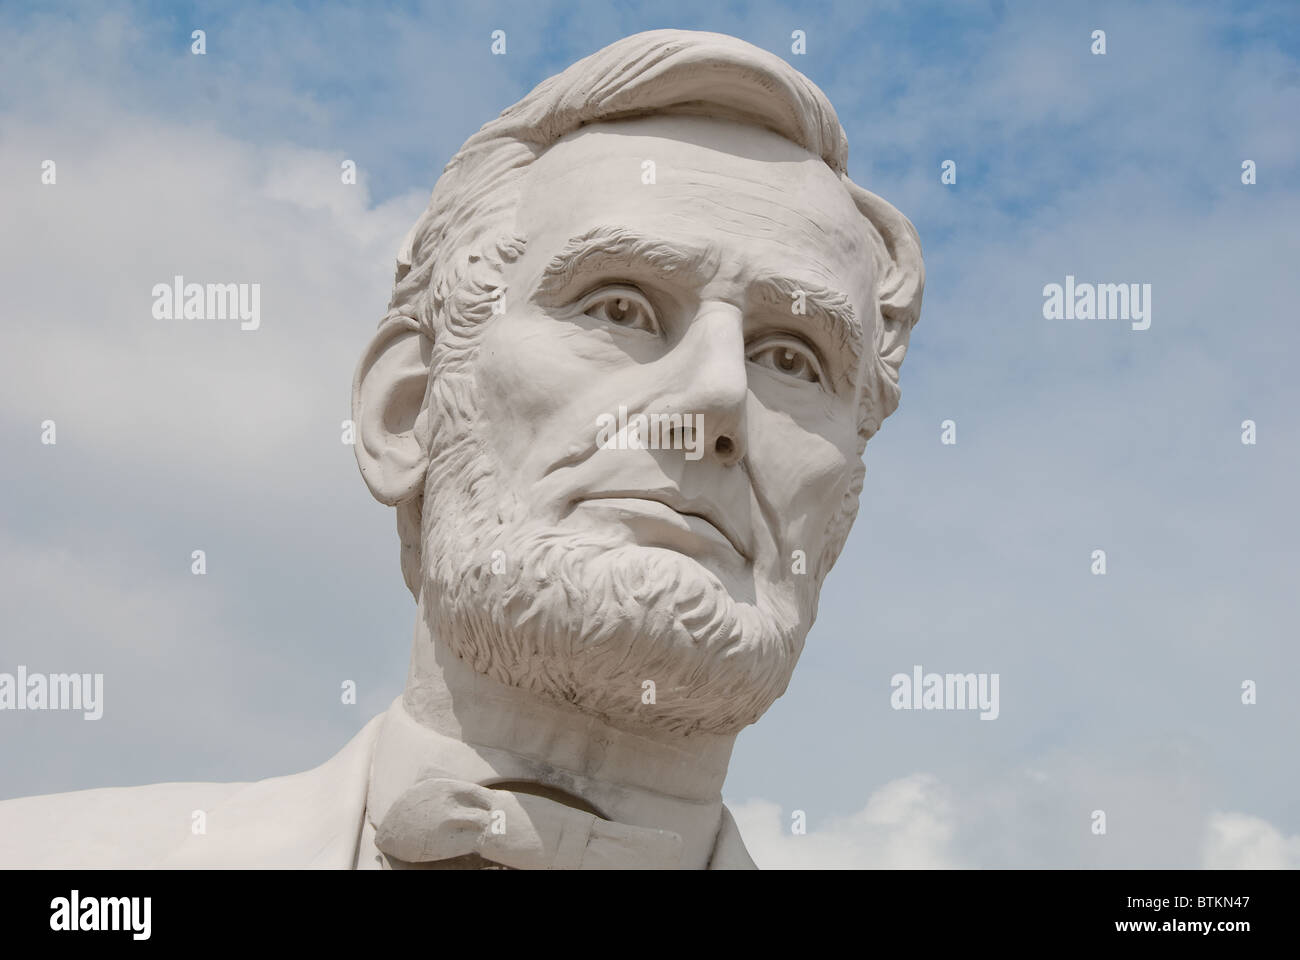 Abraham Lincoln (16th President of USA) on 'Mount Rush Hour' by sculptor David Adickes, Houston, Texas, USA Stock Photo